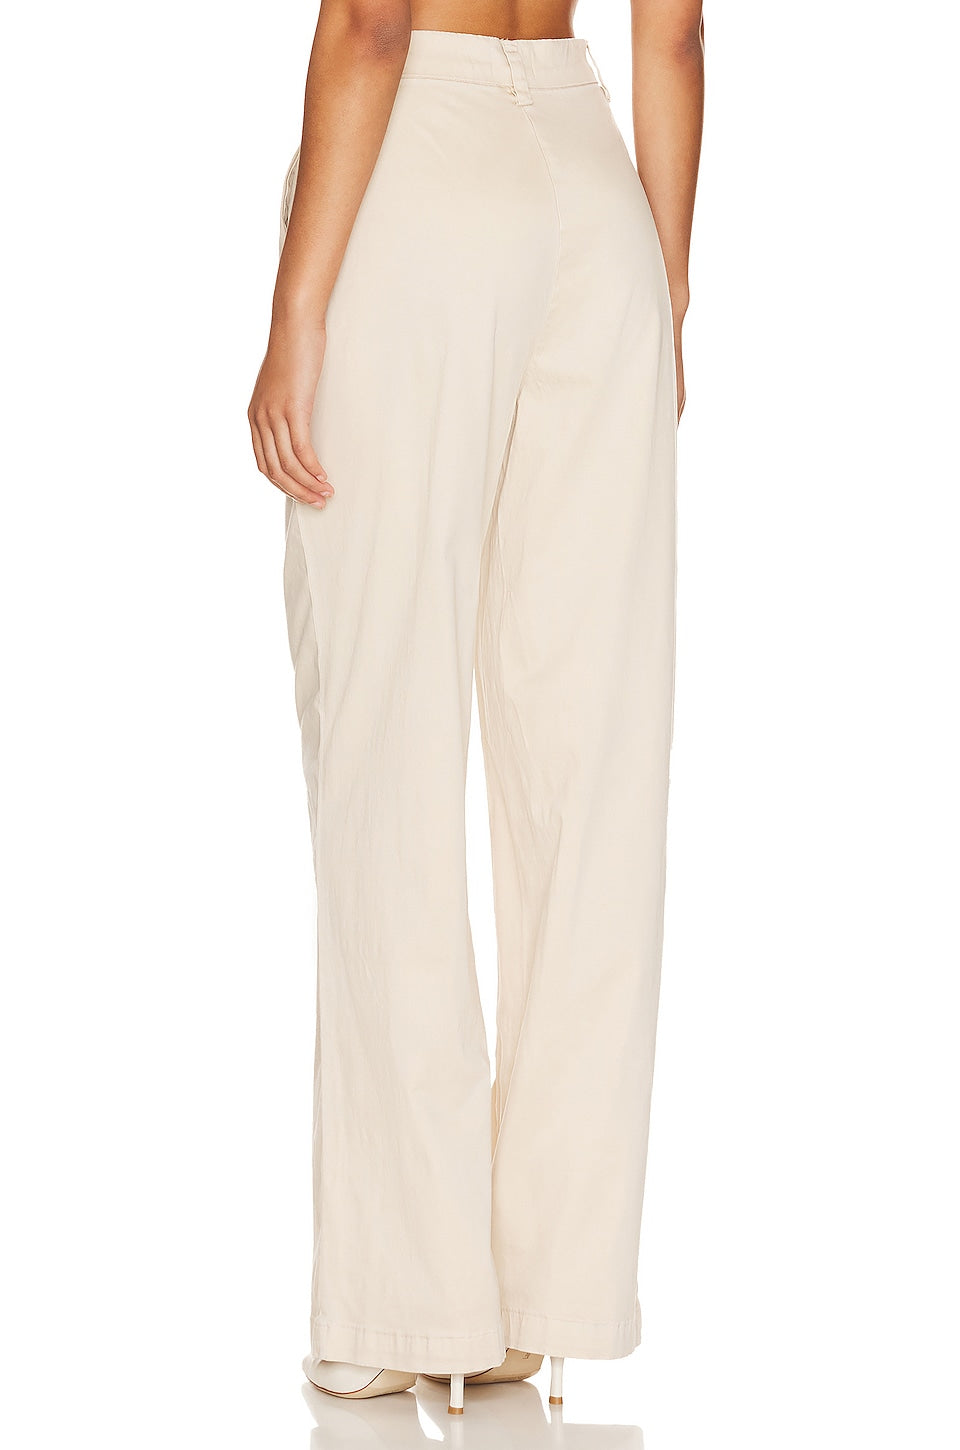 Cotton Citizen London Relaxed Pant-Oatmeal